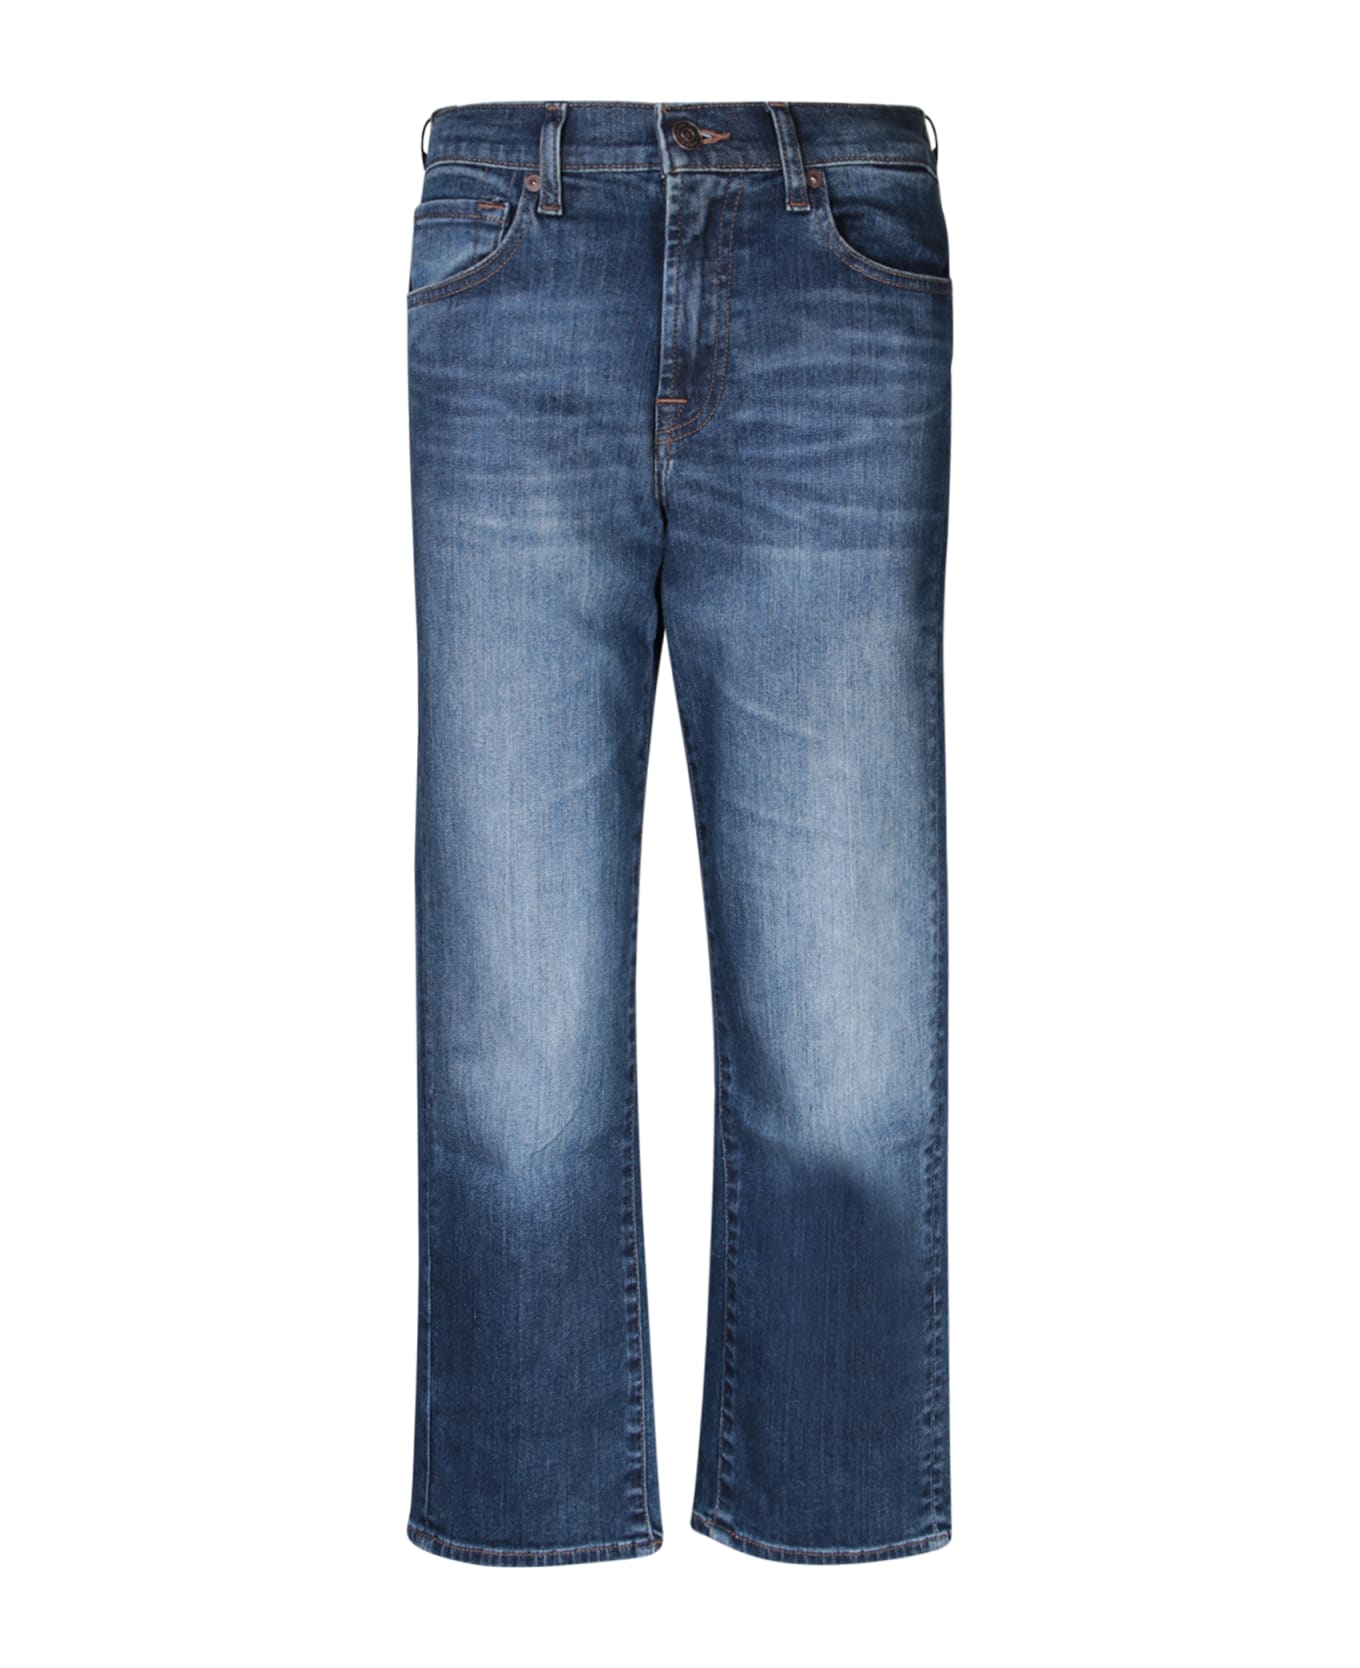 7 For All Mankind The Modern Straight Blue Jeans - Blue デニム